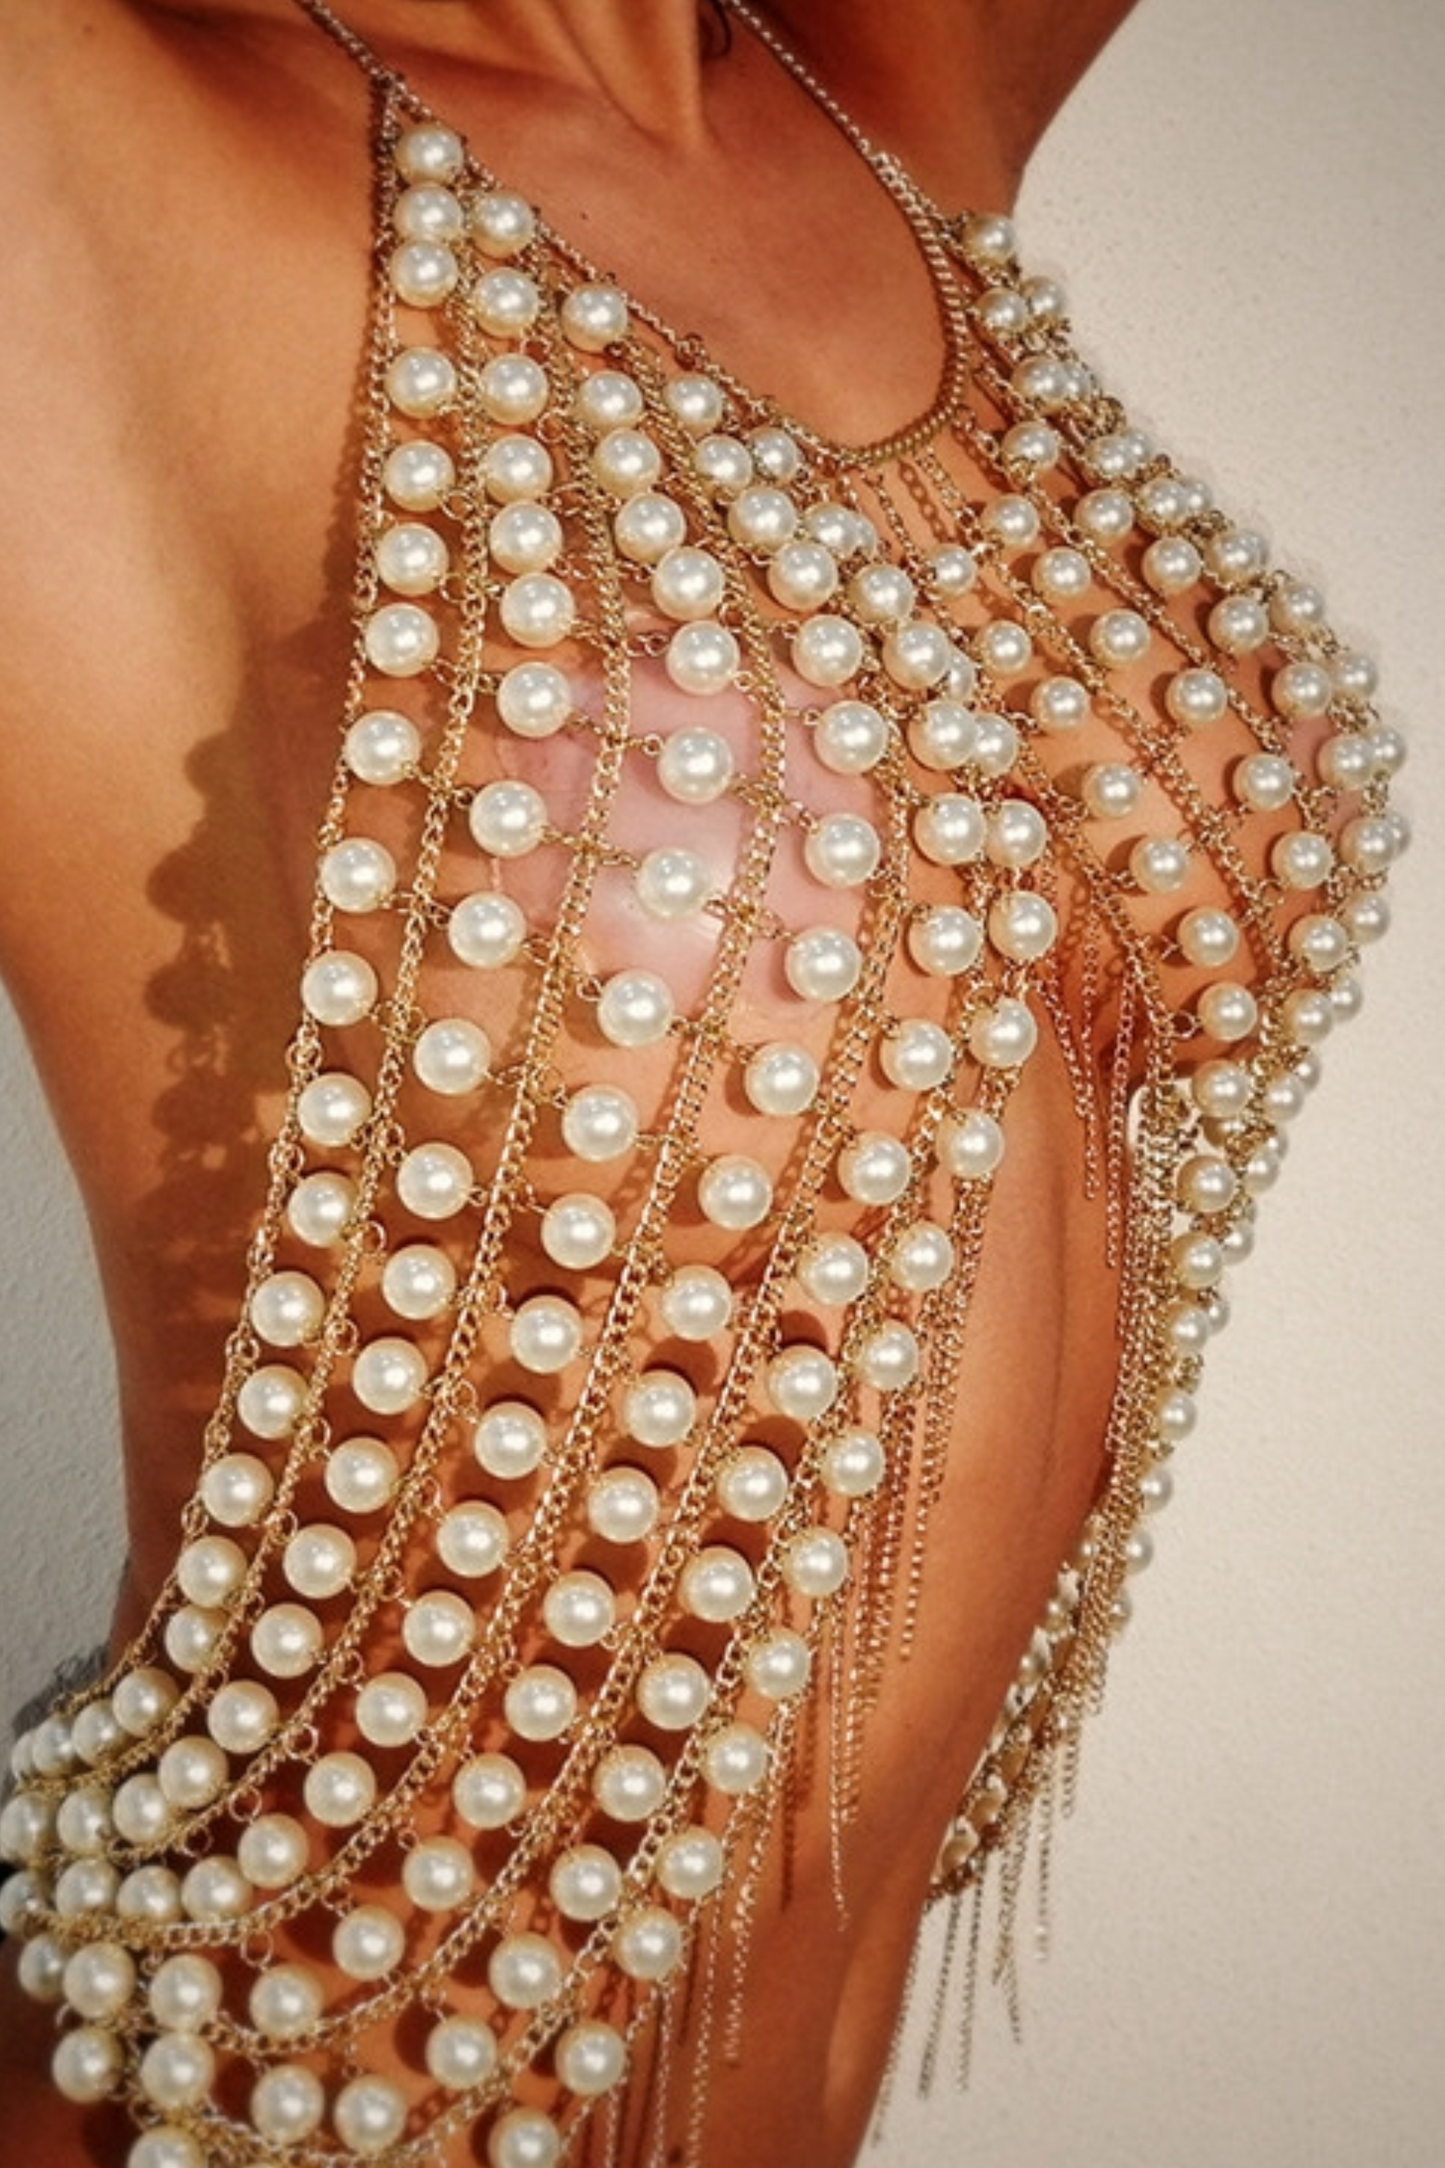 Lady In Pearls Top